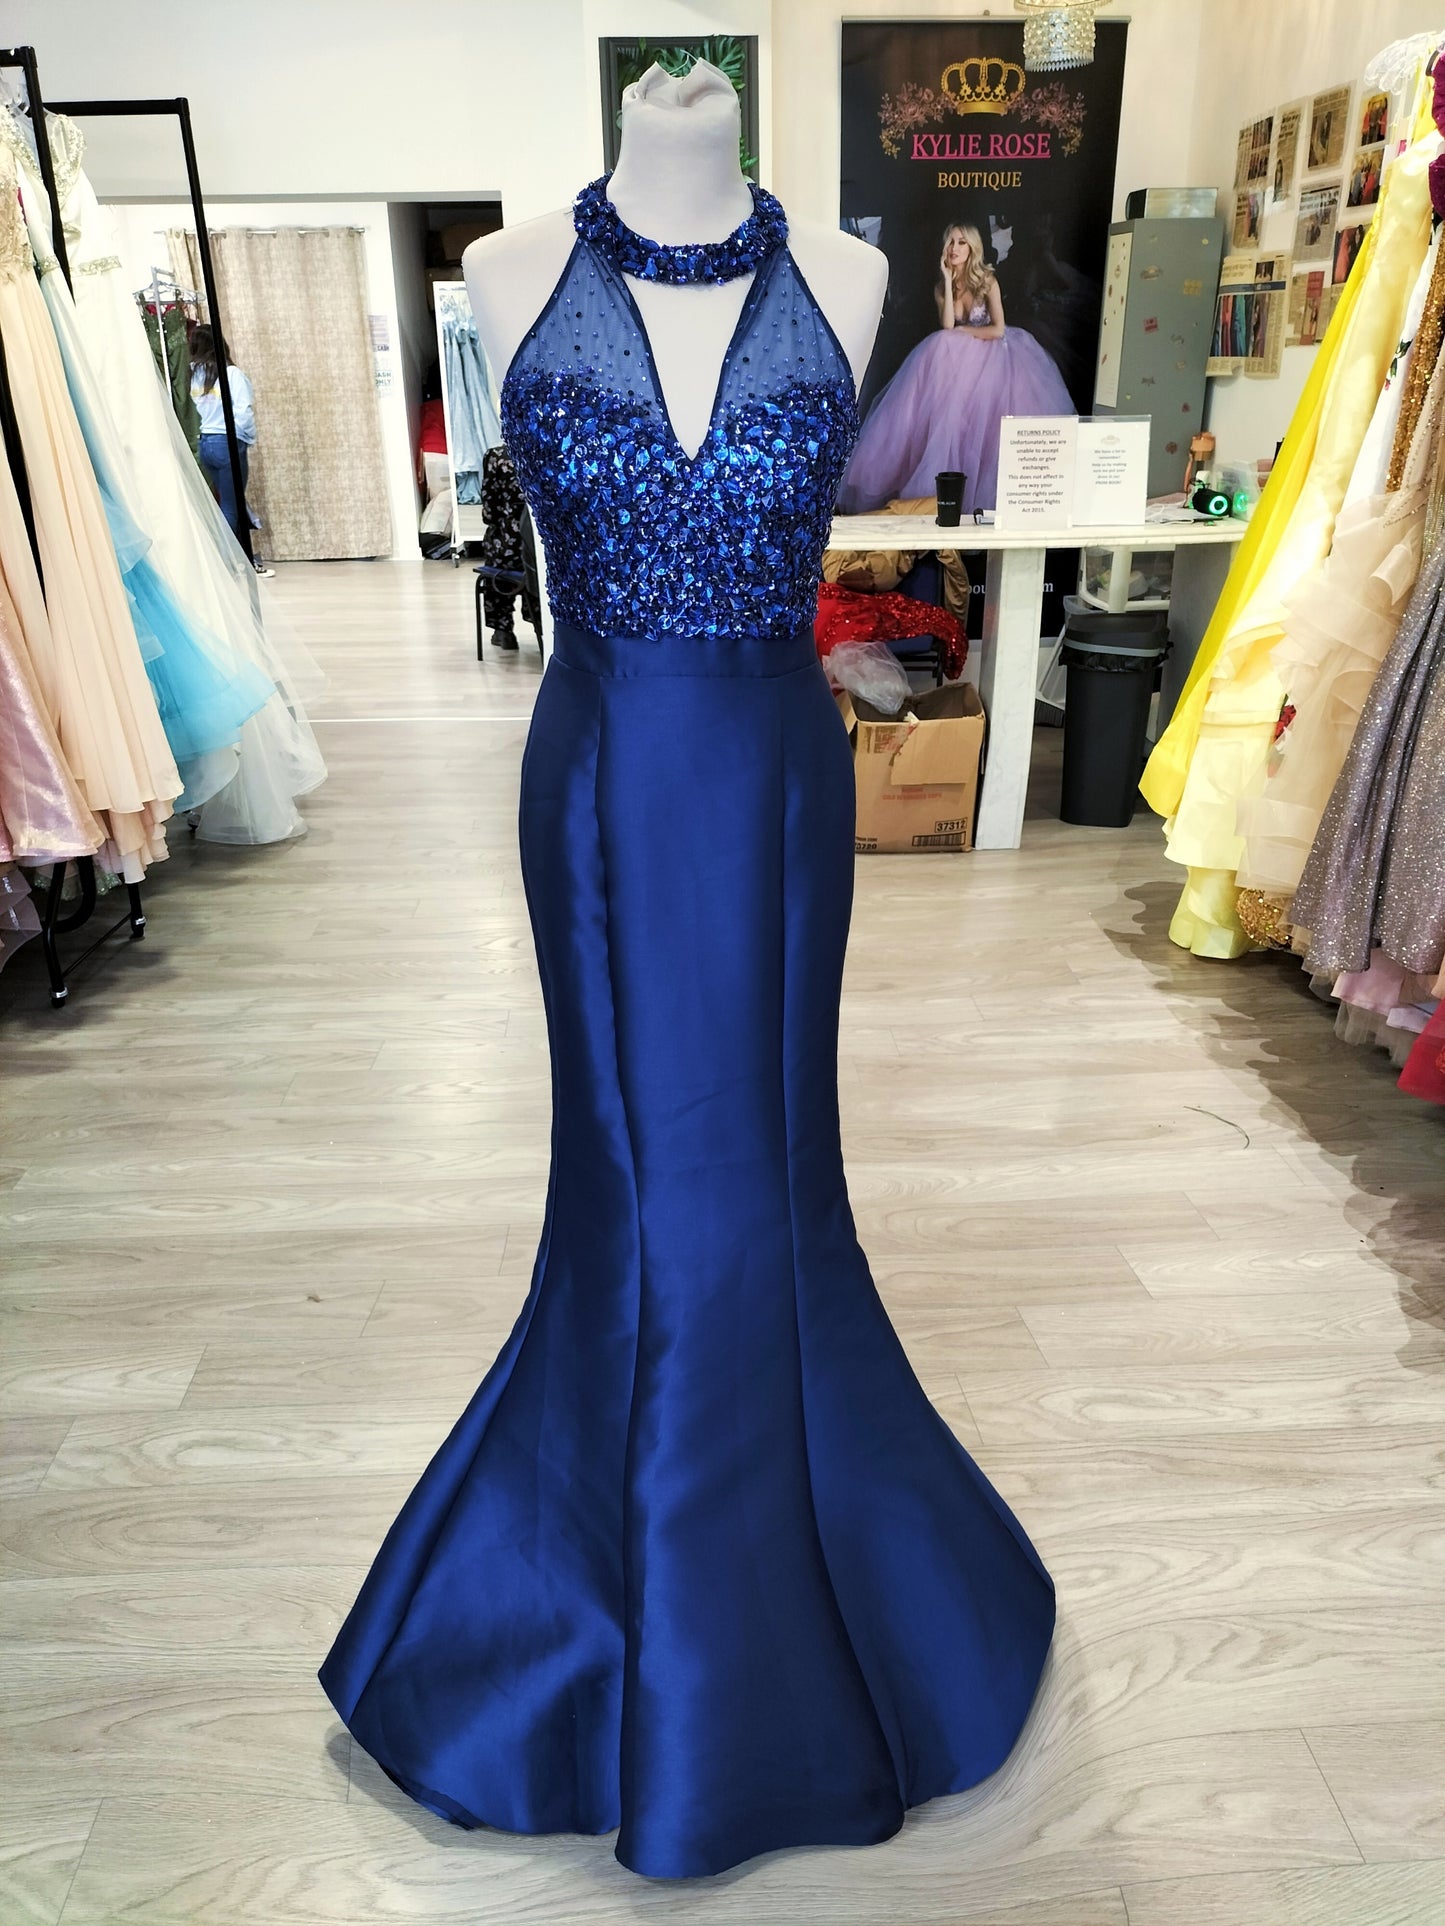 Deep royal blue satin dress with crystal bodice and bell bottom 💙💙💙💙💙💙       RRP £550